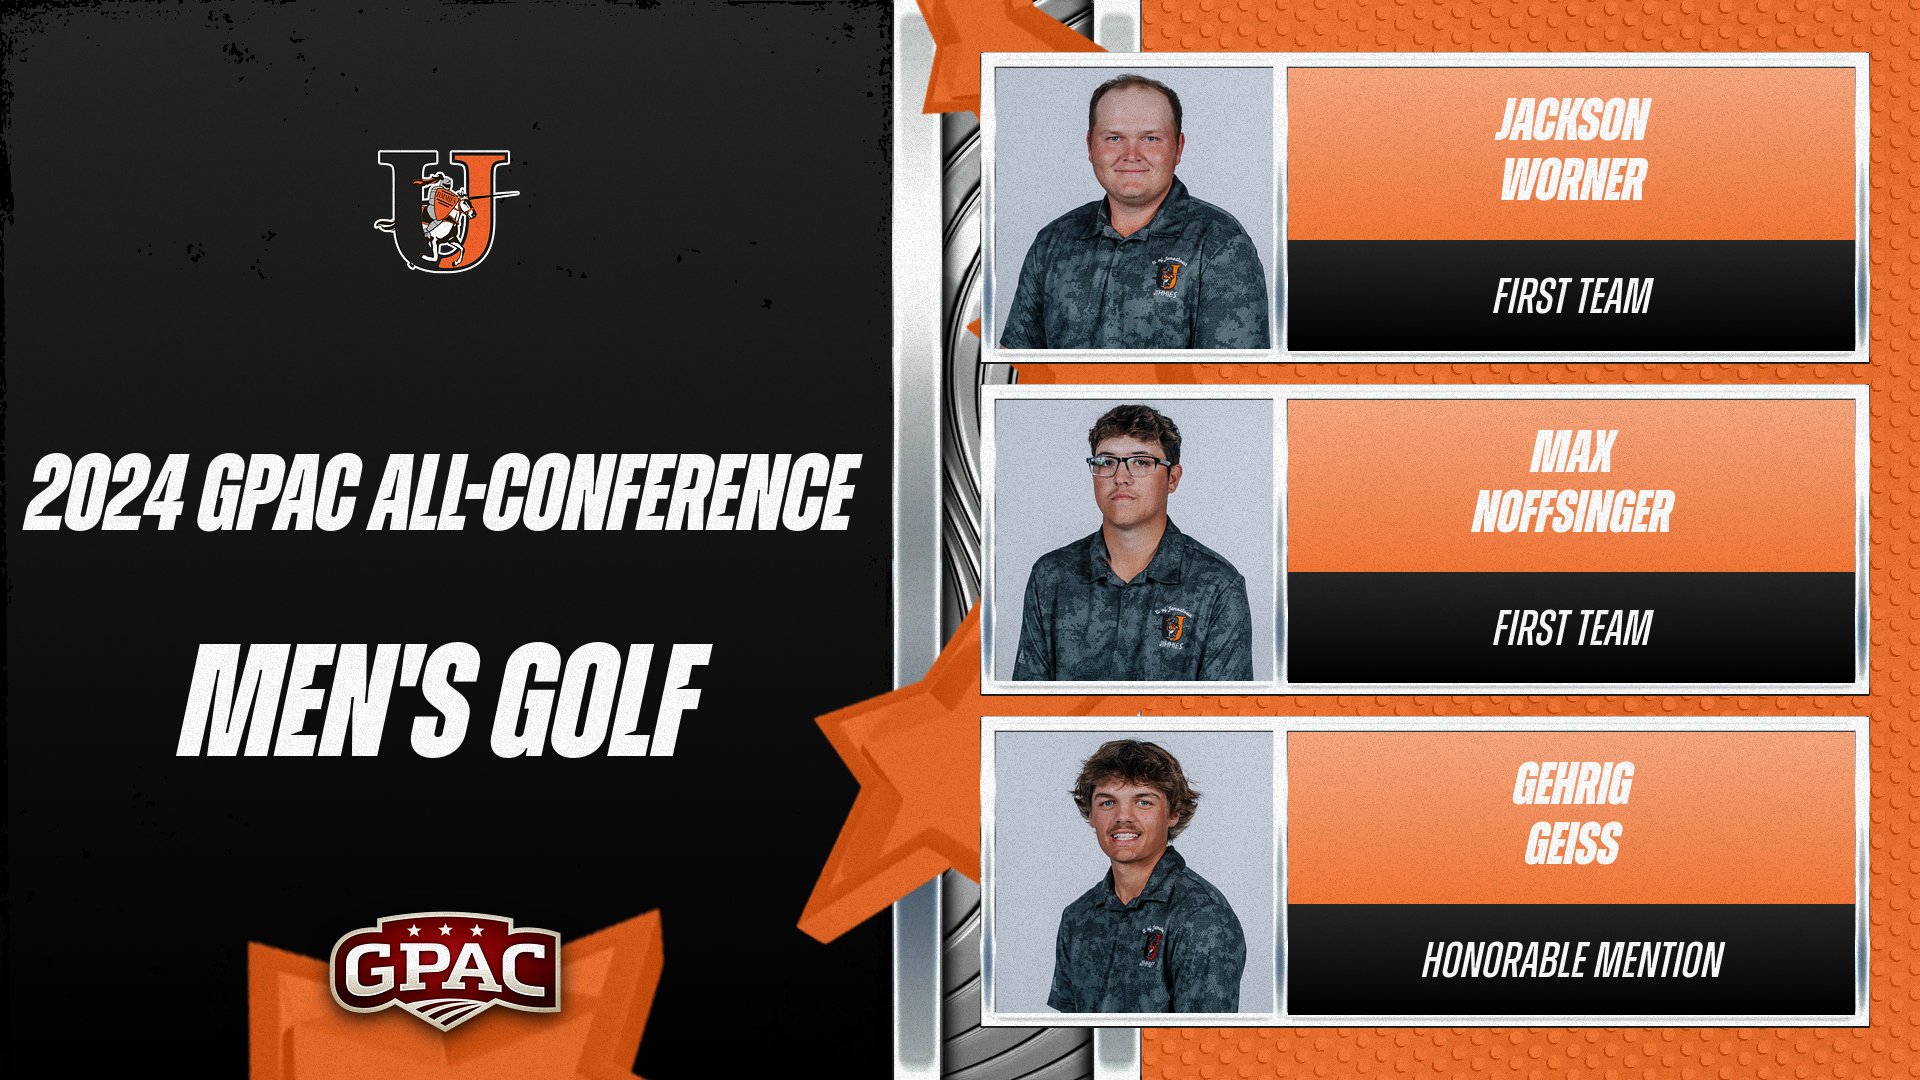 Jackson Worner & Max Noffsinger named to GPAC All-Conference First Team